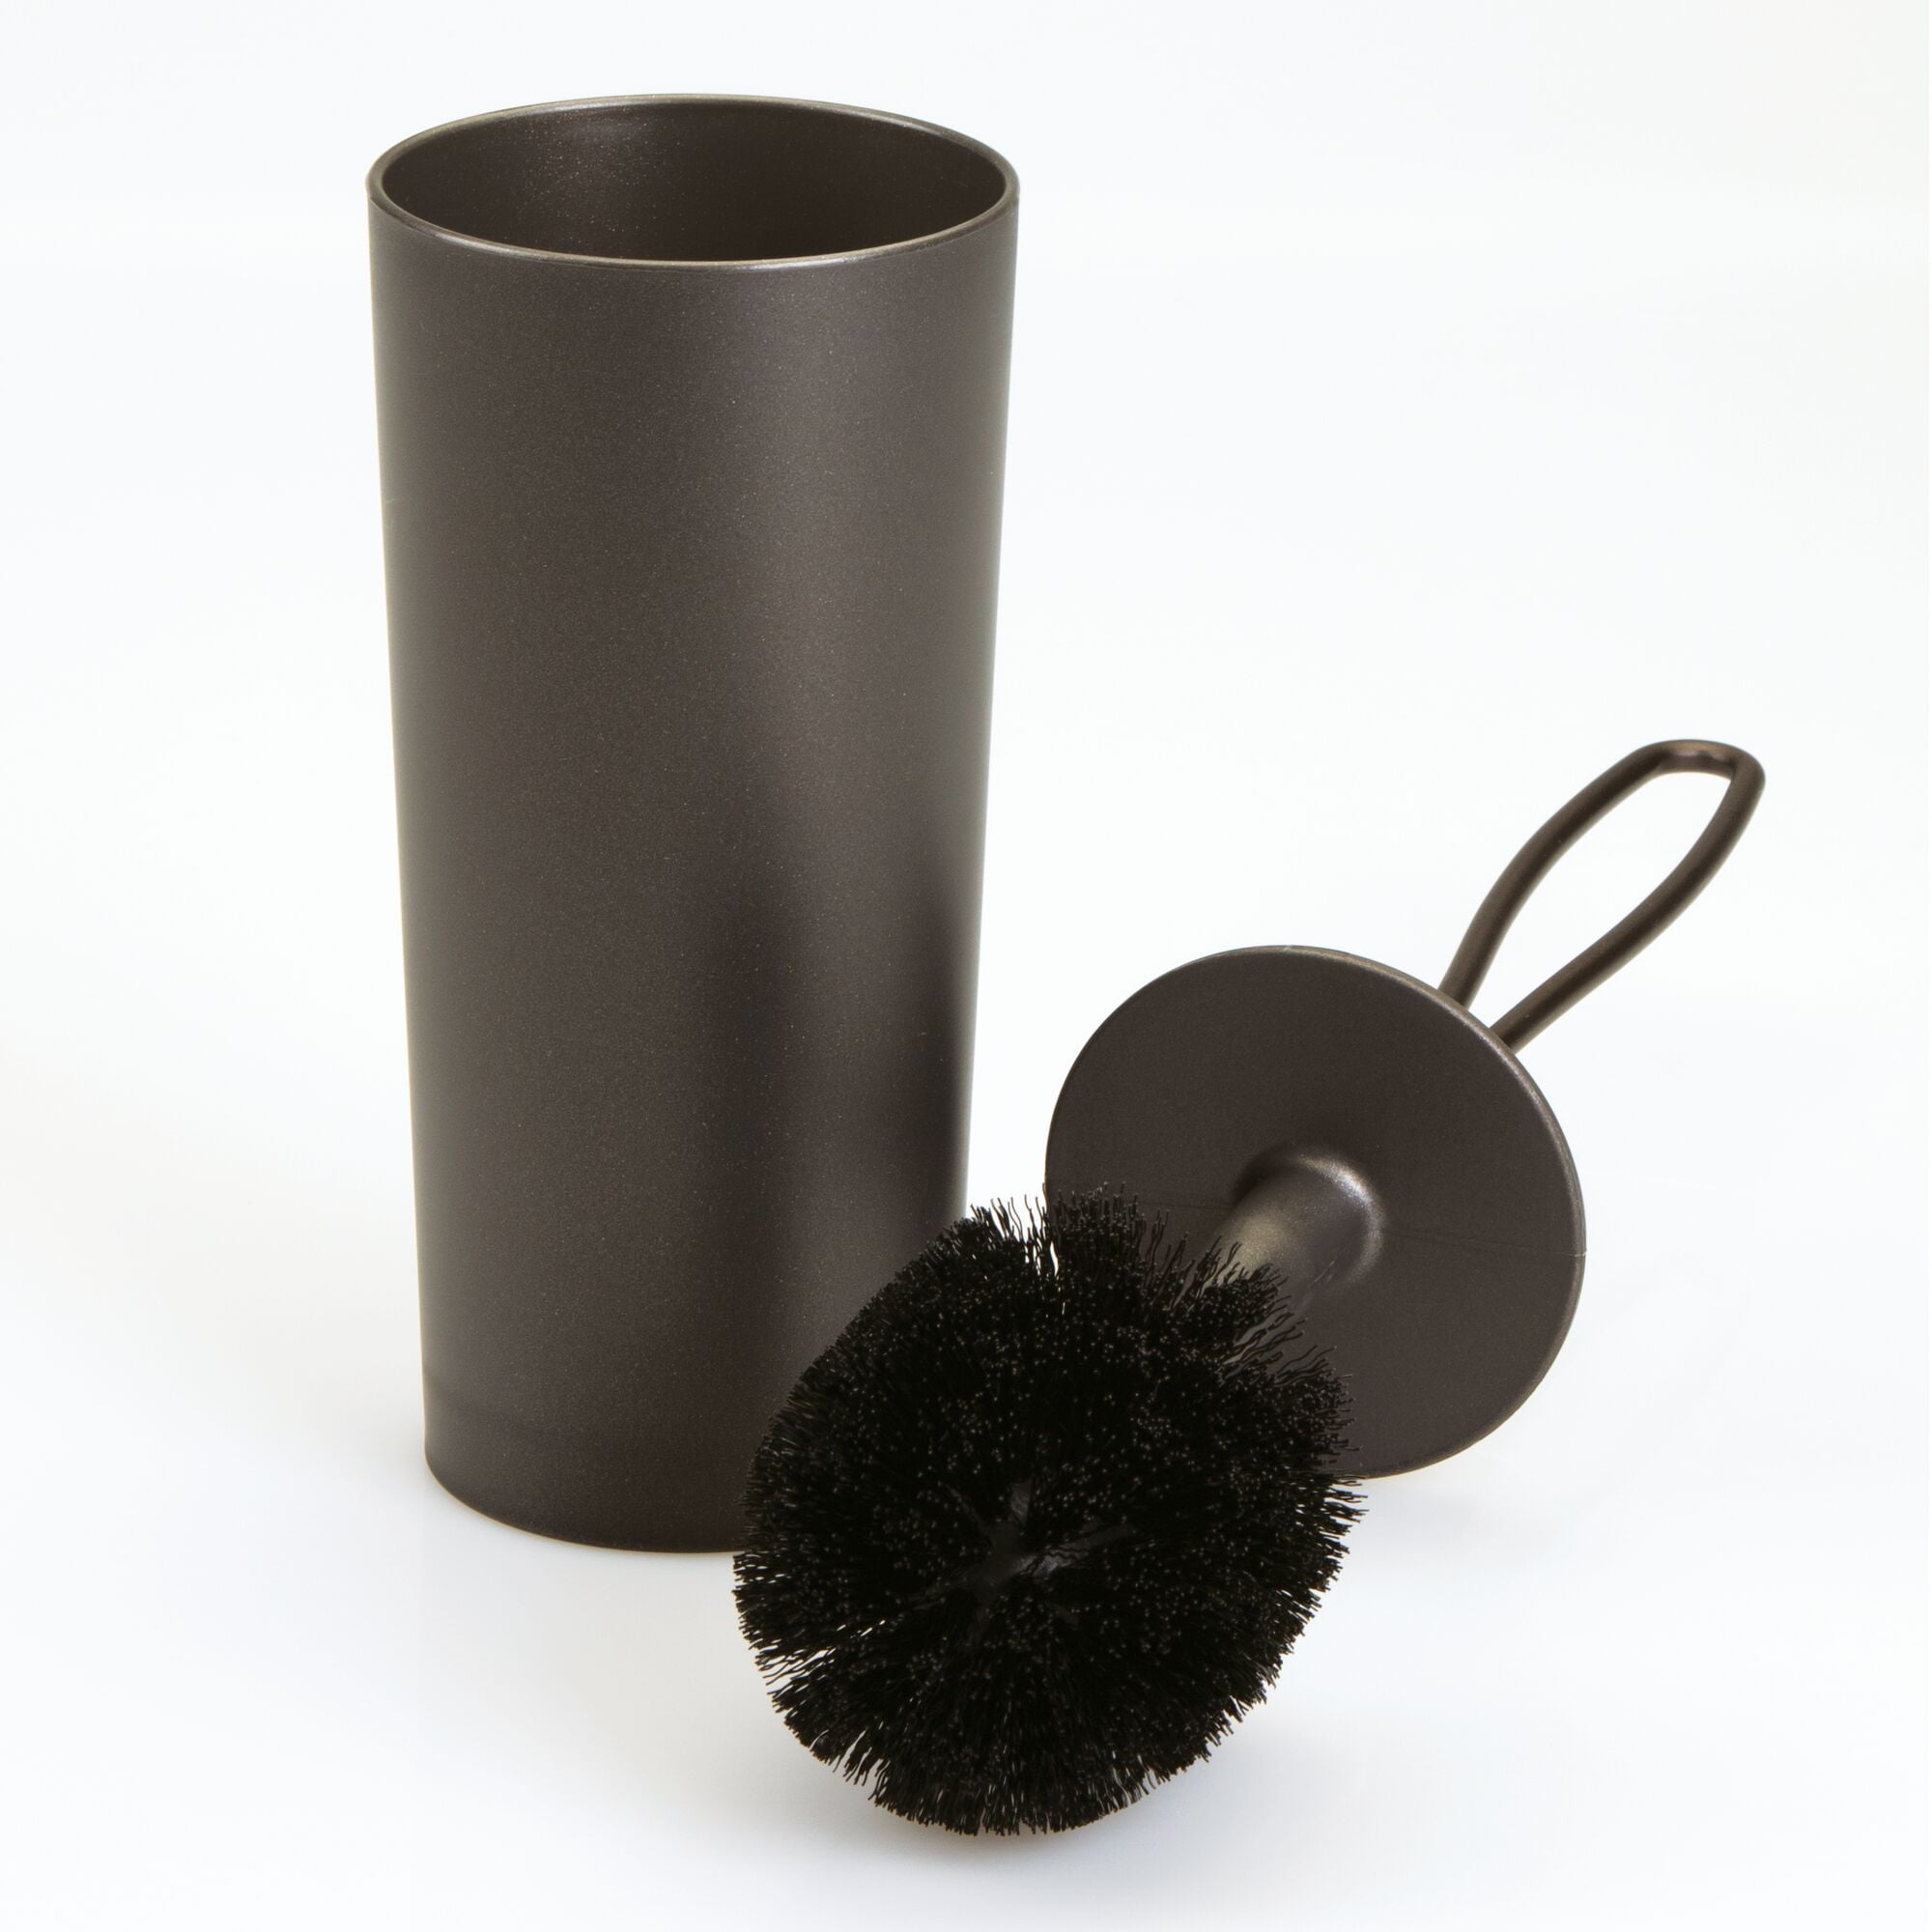 Home-it Toilet Bowl Brush and Holder - Bronze Bathroom Accessories Covered  Toilet Brush Compact, Space Saving, Deep Cleaning Brush for Tall Toilet